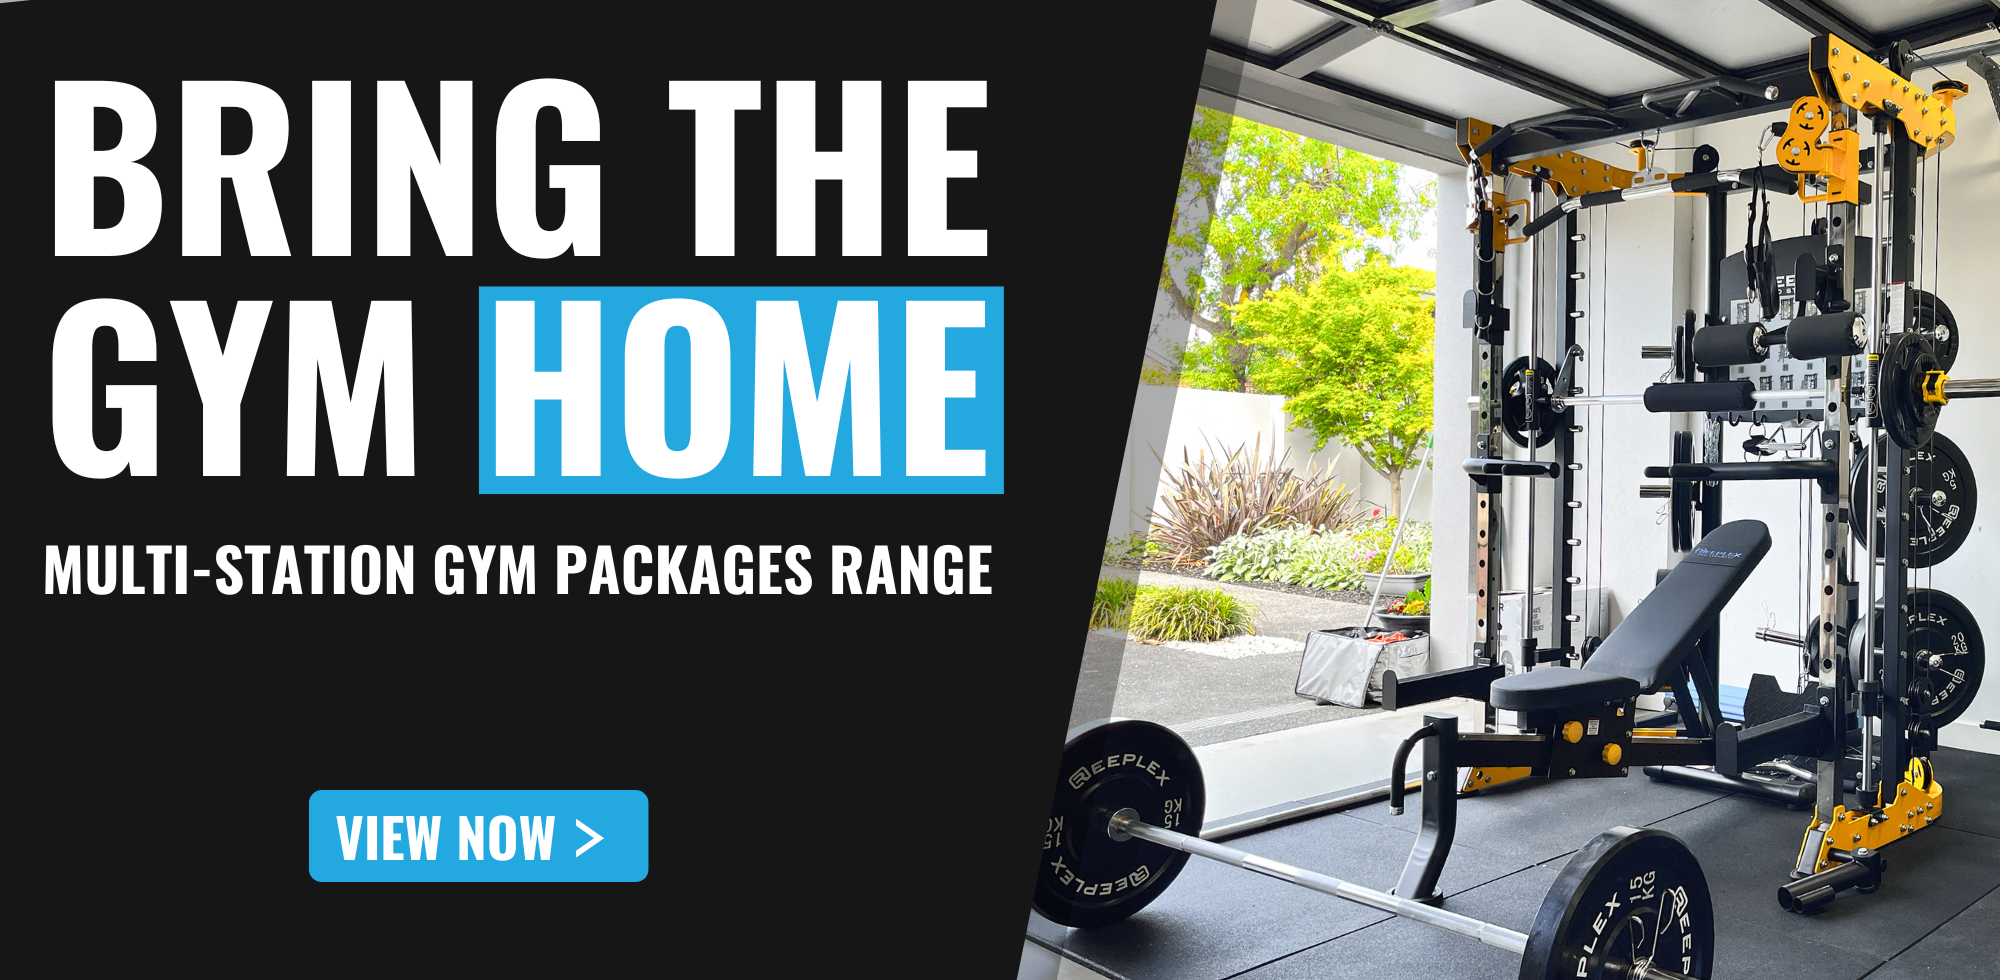 Bring the gym home - view our multi-station gym packages